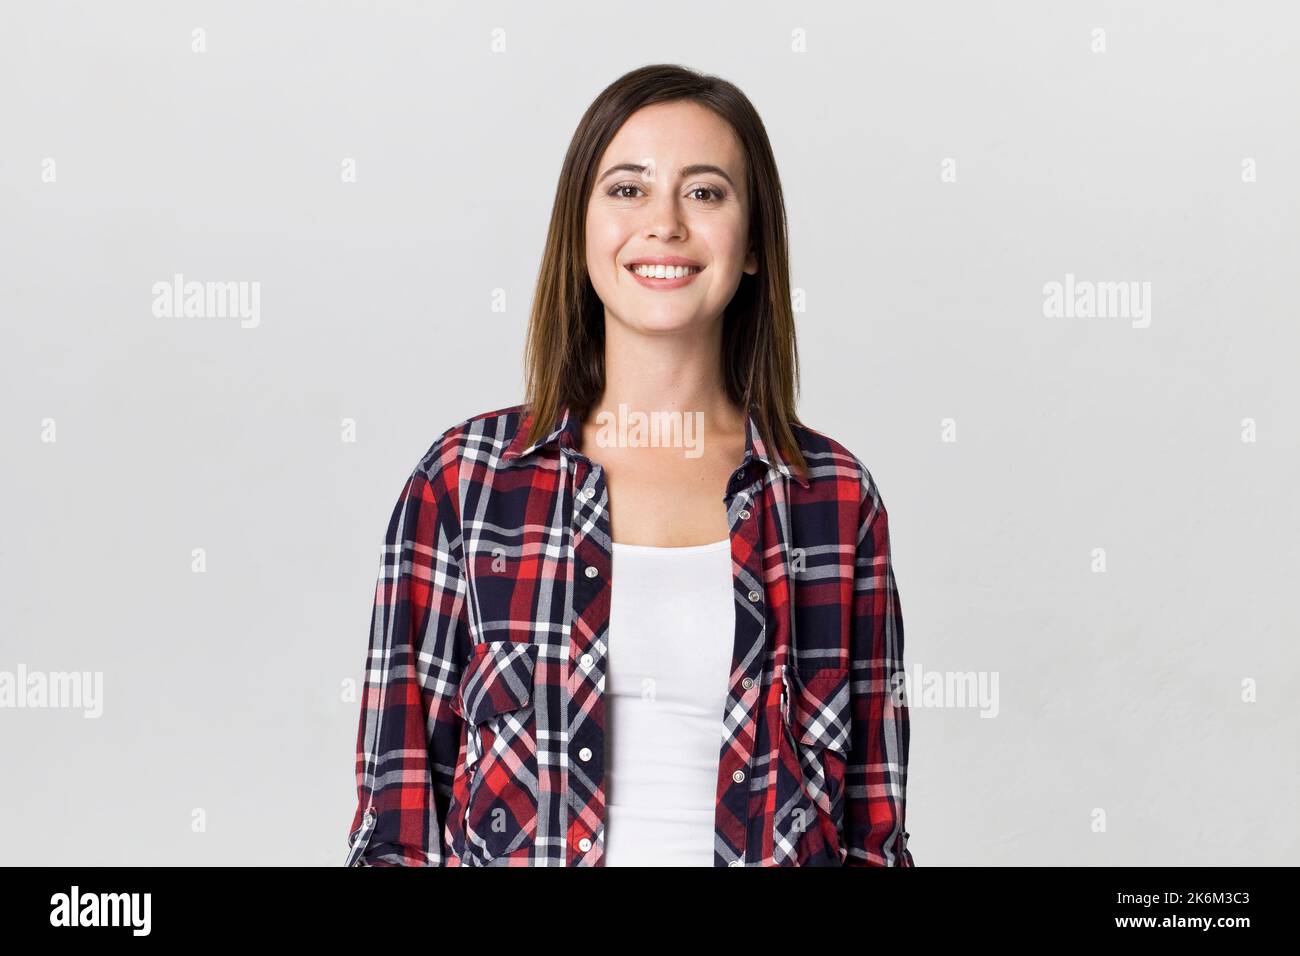 Smiling positive female with attractive look, wearing checkered shirt, posing against white blank wall Stock Photo